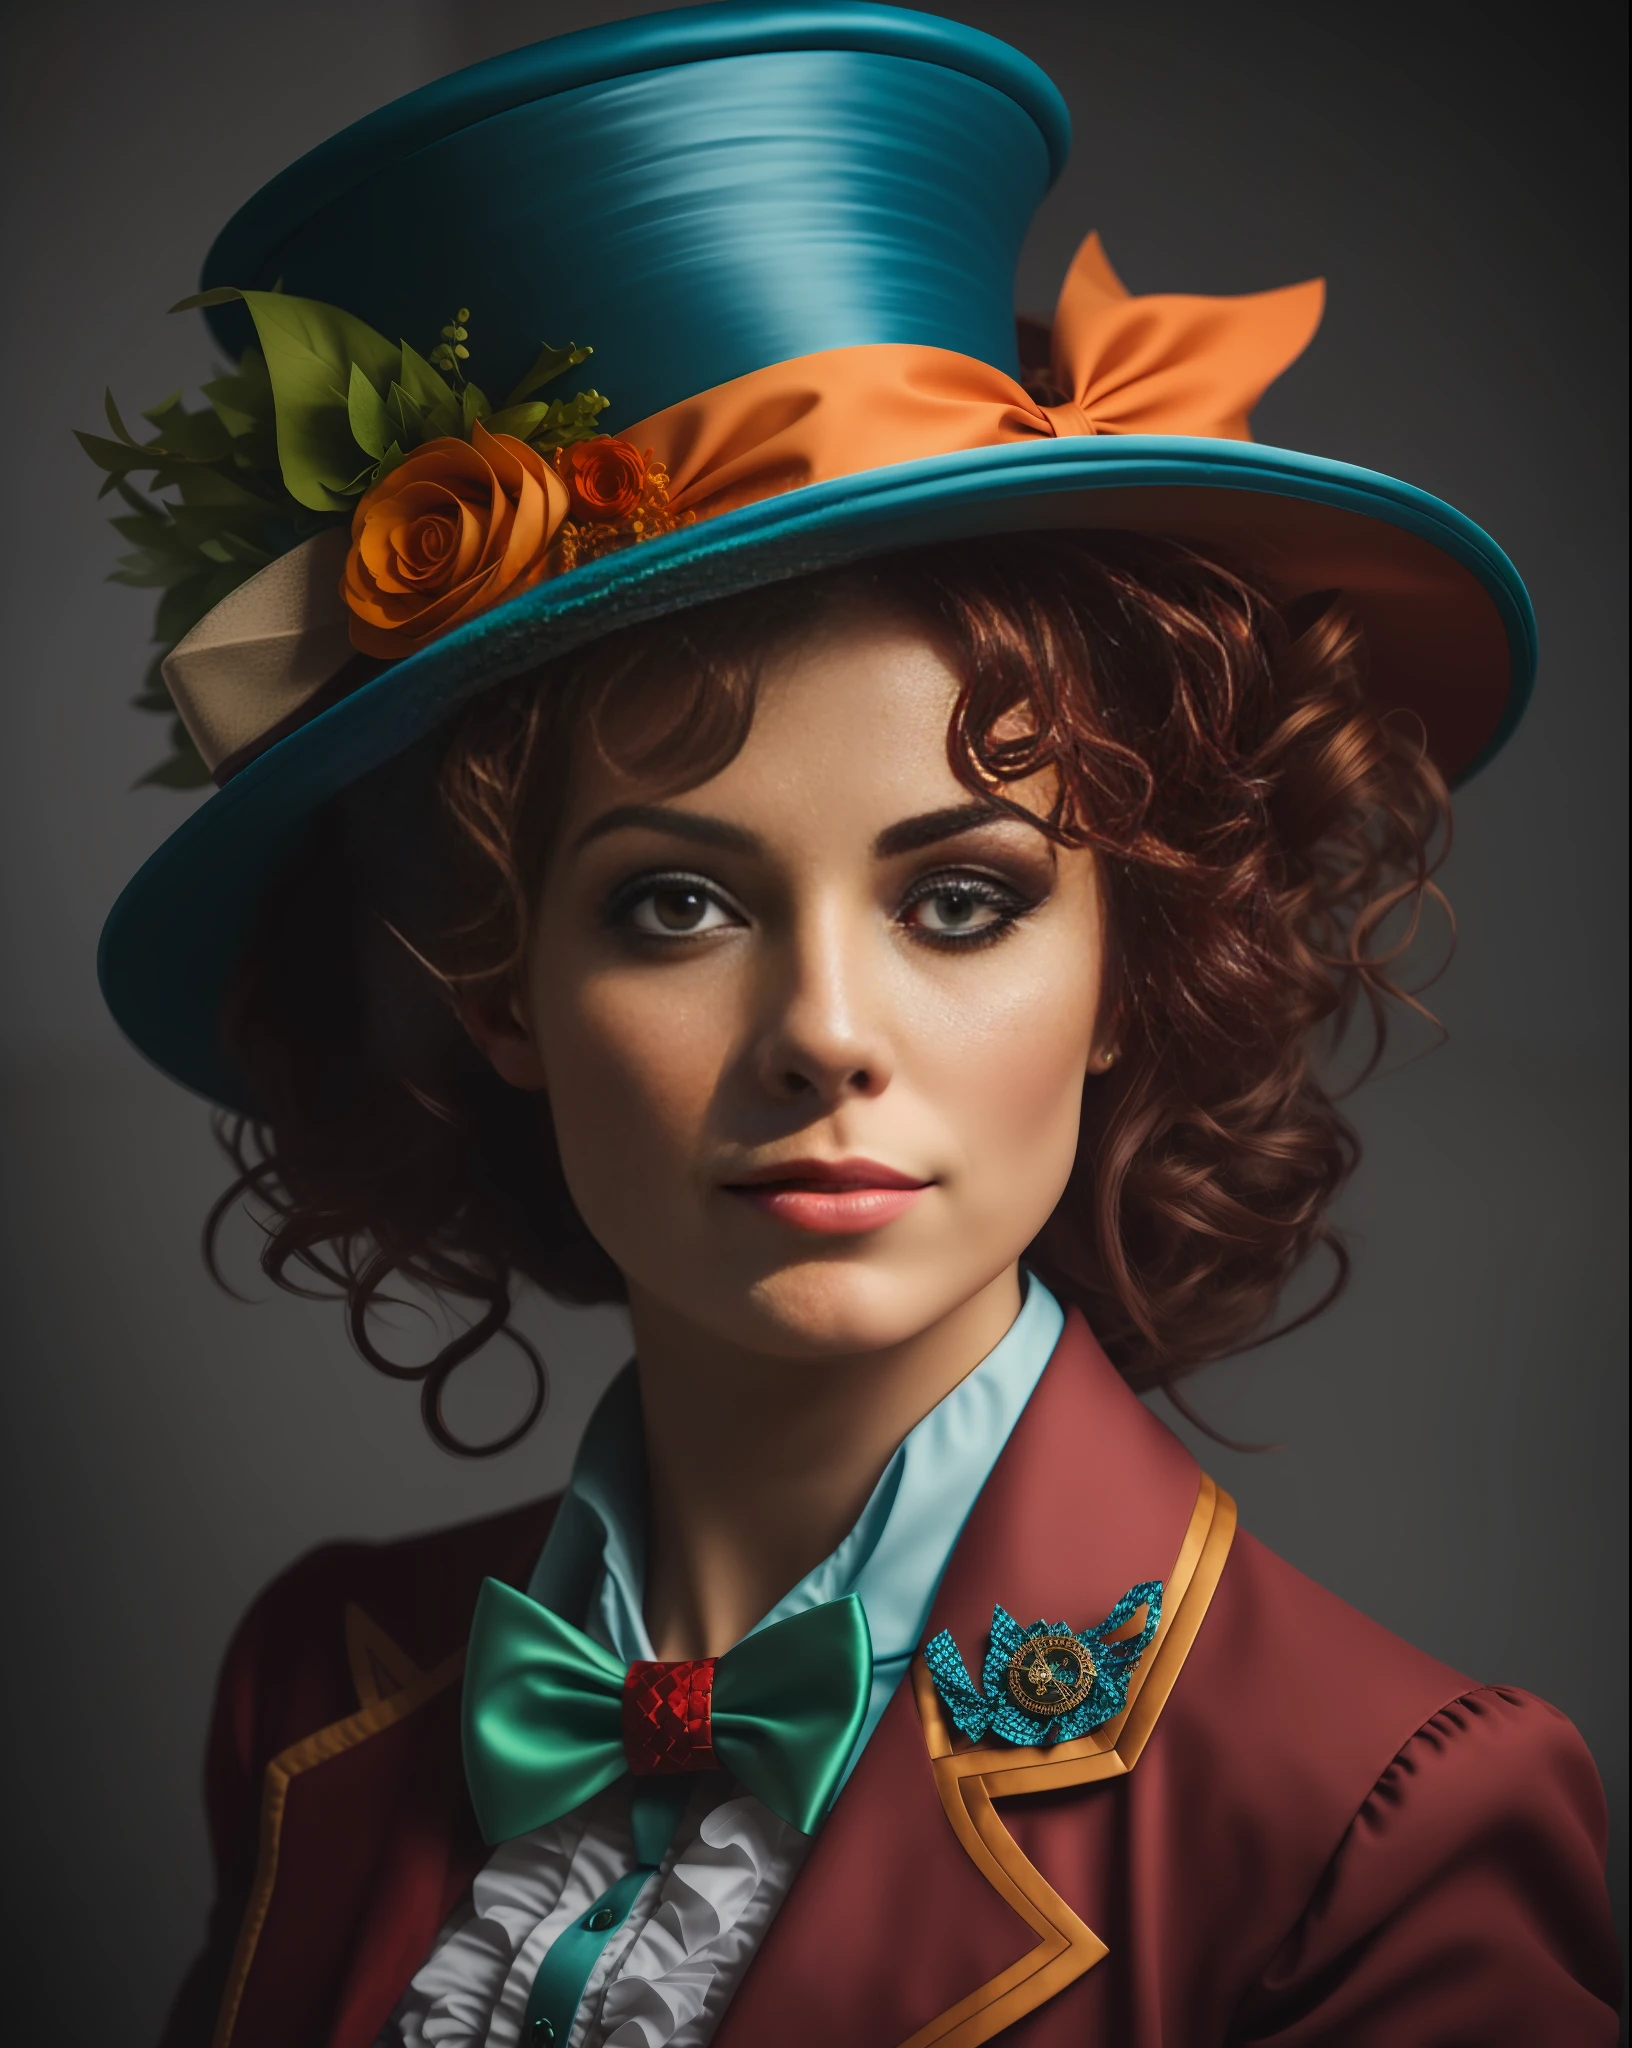 There is a woman with a hat and a bow tie, Female Mad Hatter, Circus Artist Portrait, The Madhatter, Portrait of Alice in Wonderland, Portrait of a Steampunk Ice Lady, The Rad Hatter, Colorful Portrait, Mad Hatter, Portrait 4K Color Photography, The Mad Hatter, Photography Portrait Photography, Editorial Portrait, Portrait Photography 4K, (High Definition Hair),  (high definition body)